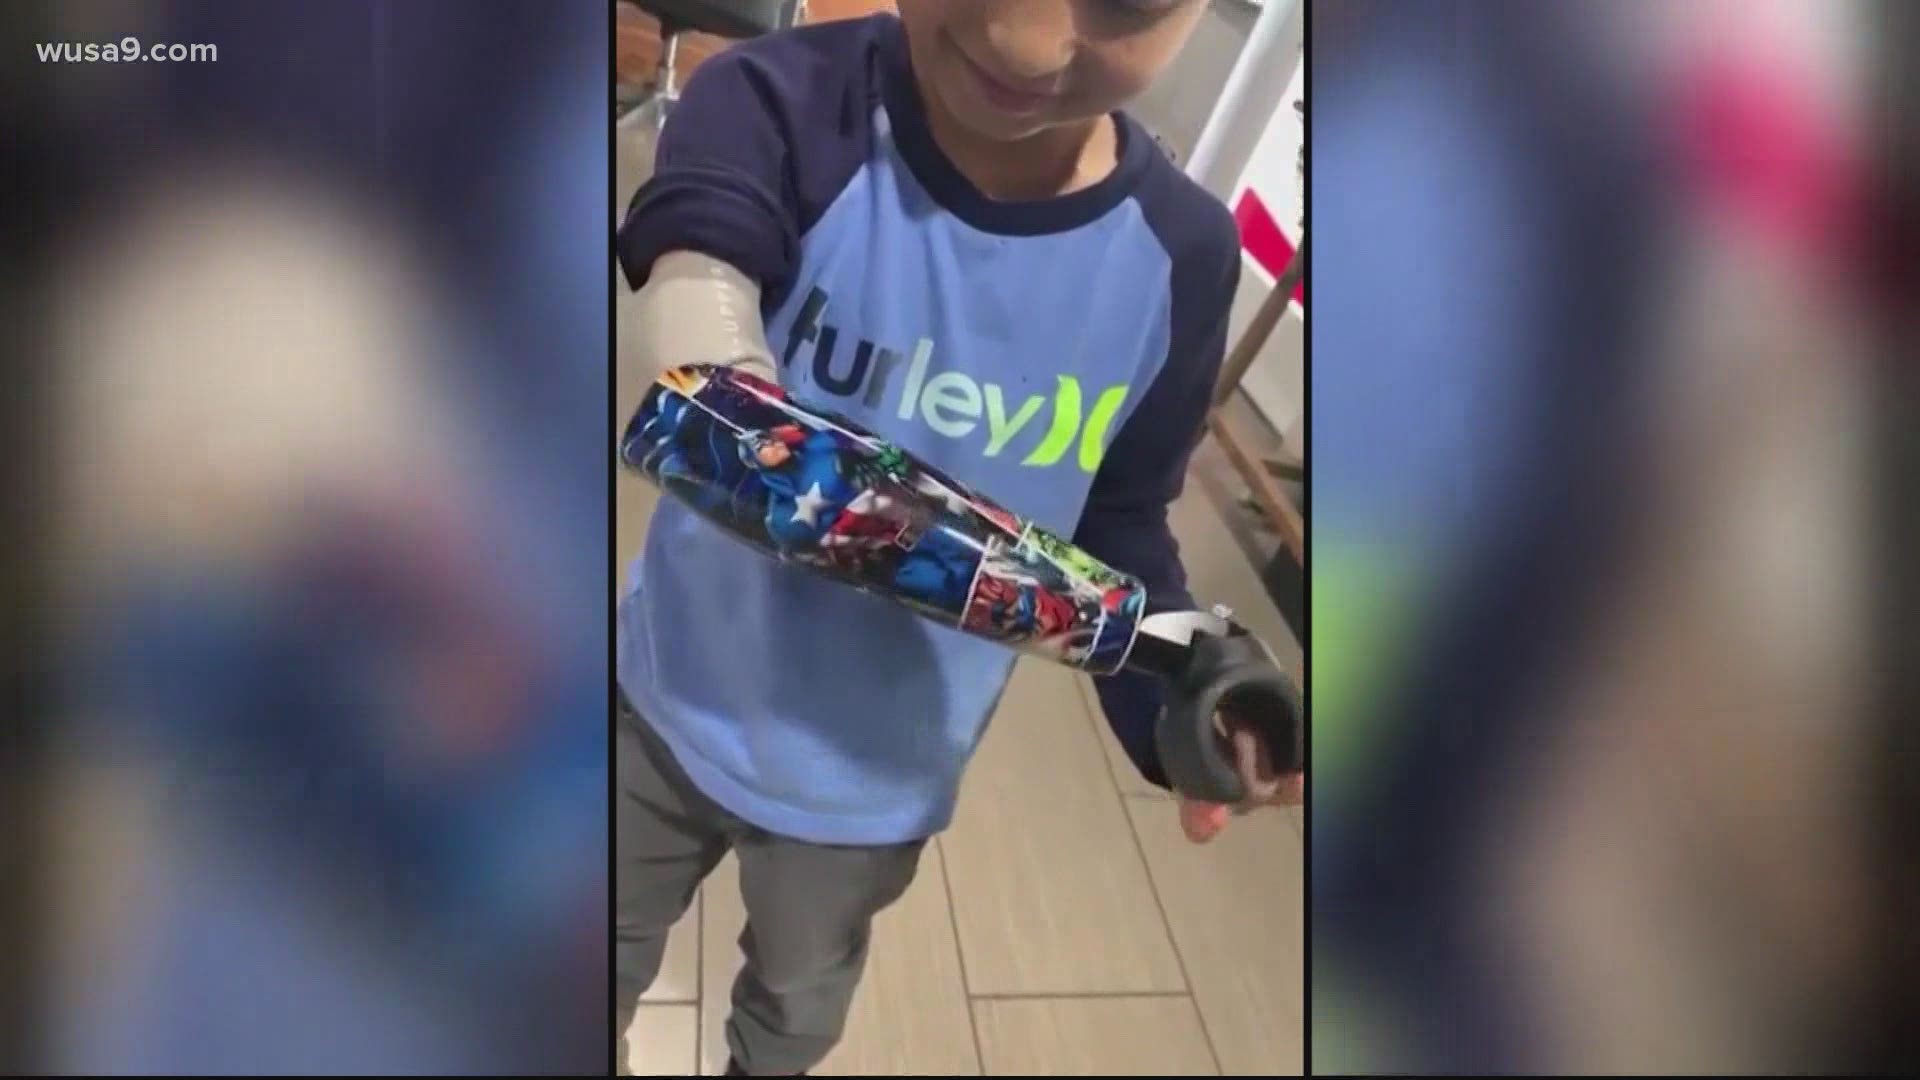 The artist paints super heroes on the prosthetic limbs and gives them away for free!